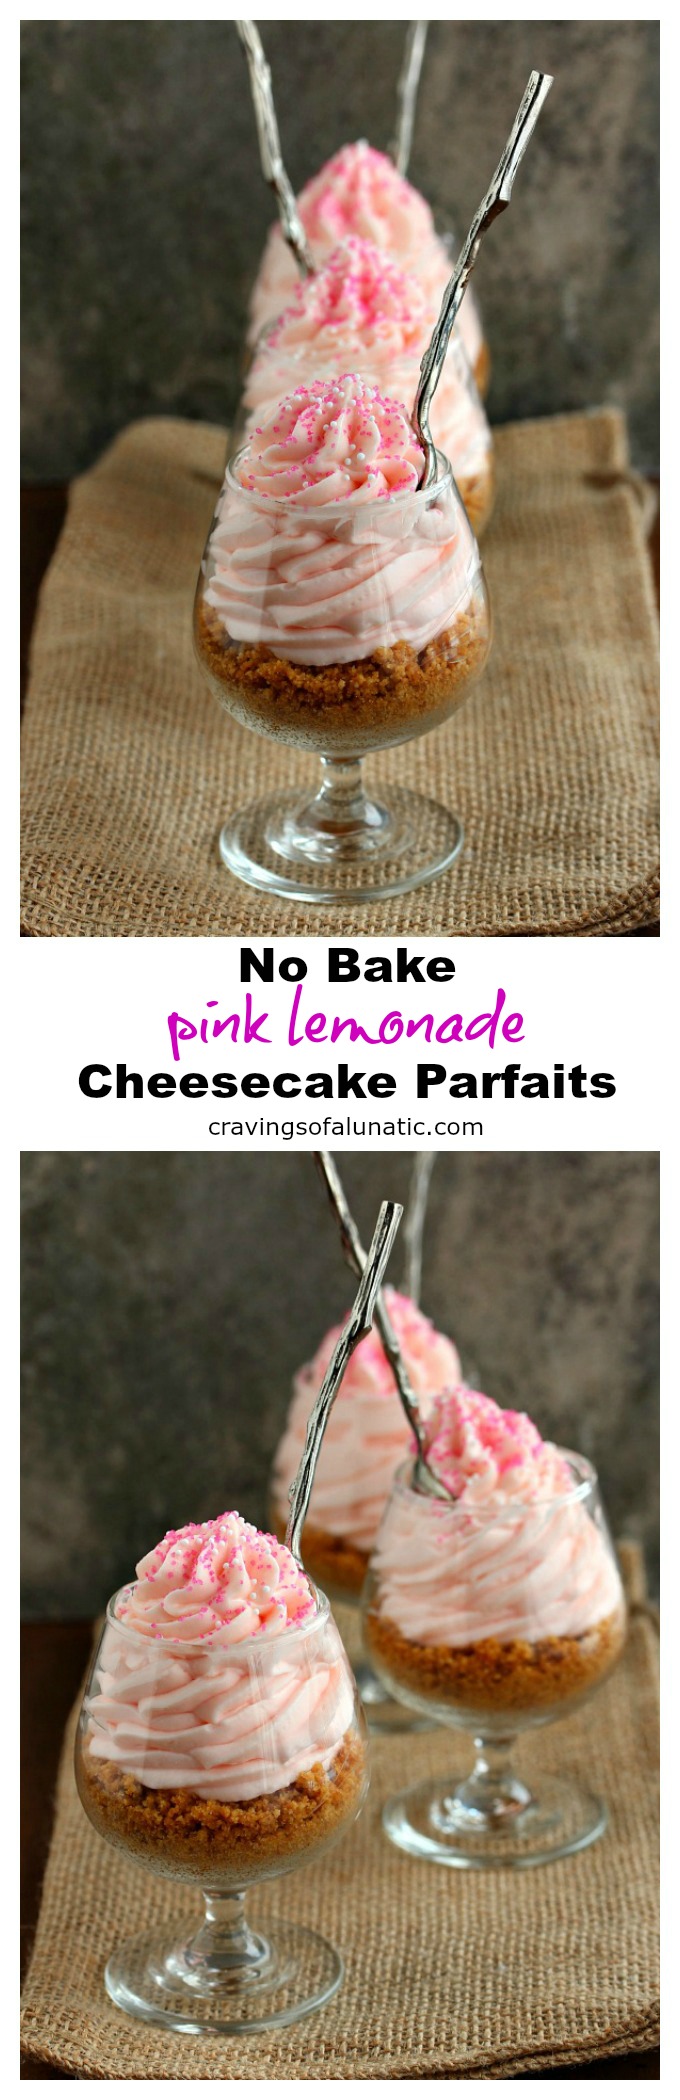 Pink Lemonade No Bake Cheesecake Parfaits from cravingsofalunatic.com- These super easy to make Pink Lemonade No Bake Cheesecakes are absolutely scrumptious. These will have you stealing them from your family members. No lie! (@CravingsLunatic)